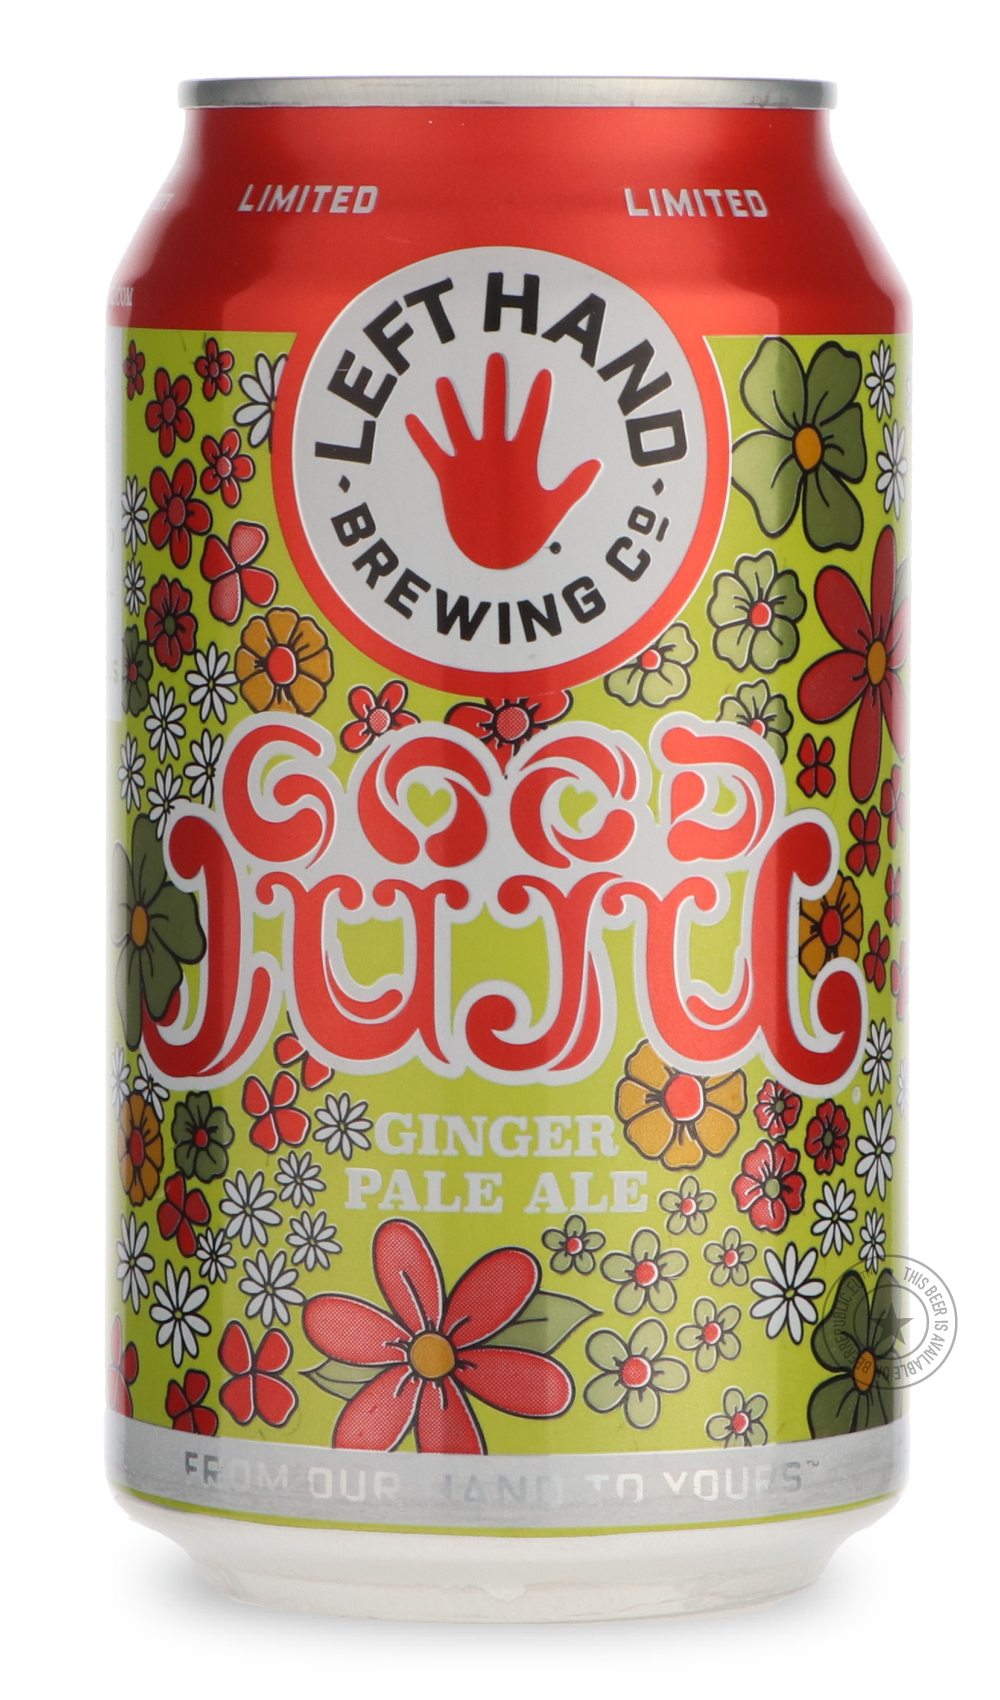 -Left Hand- Good Juju-Pale- Only @ Beer Republic - The best online beer store for American & Canadian craft beer - Buy beer online from the USA and Canada - Bier online kopen - Amerikaans bier kopen - Craft beer store - Craft beer kopen - Amerikanisch bier kaufen - Bier online kaufen - Acheter biere online - IPA - Stout - Porter - New England IPA - Hazy IPA - Imperial Stout - Barrel Aged - Barrel Aged Imperial Stout - Brown - Dark beer - Blond - Blonde - Pilsner - Lager - Wheat - Weizen - Amber - Barley Win